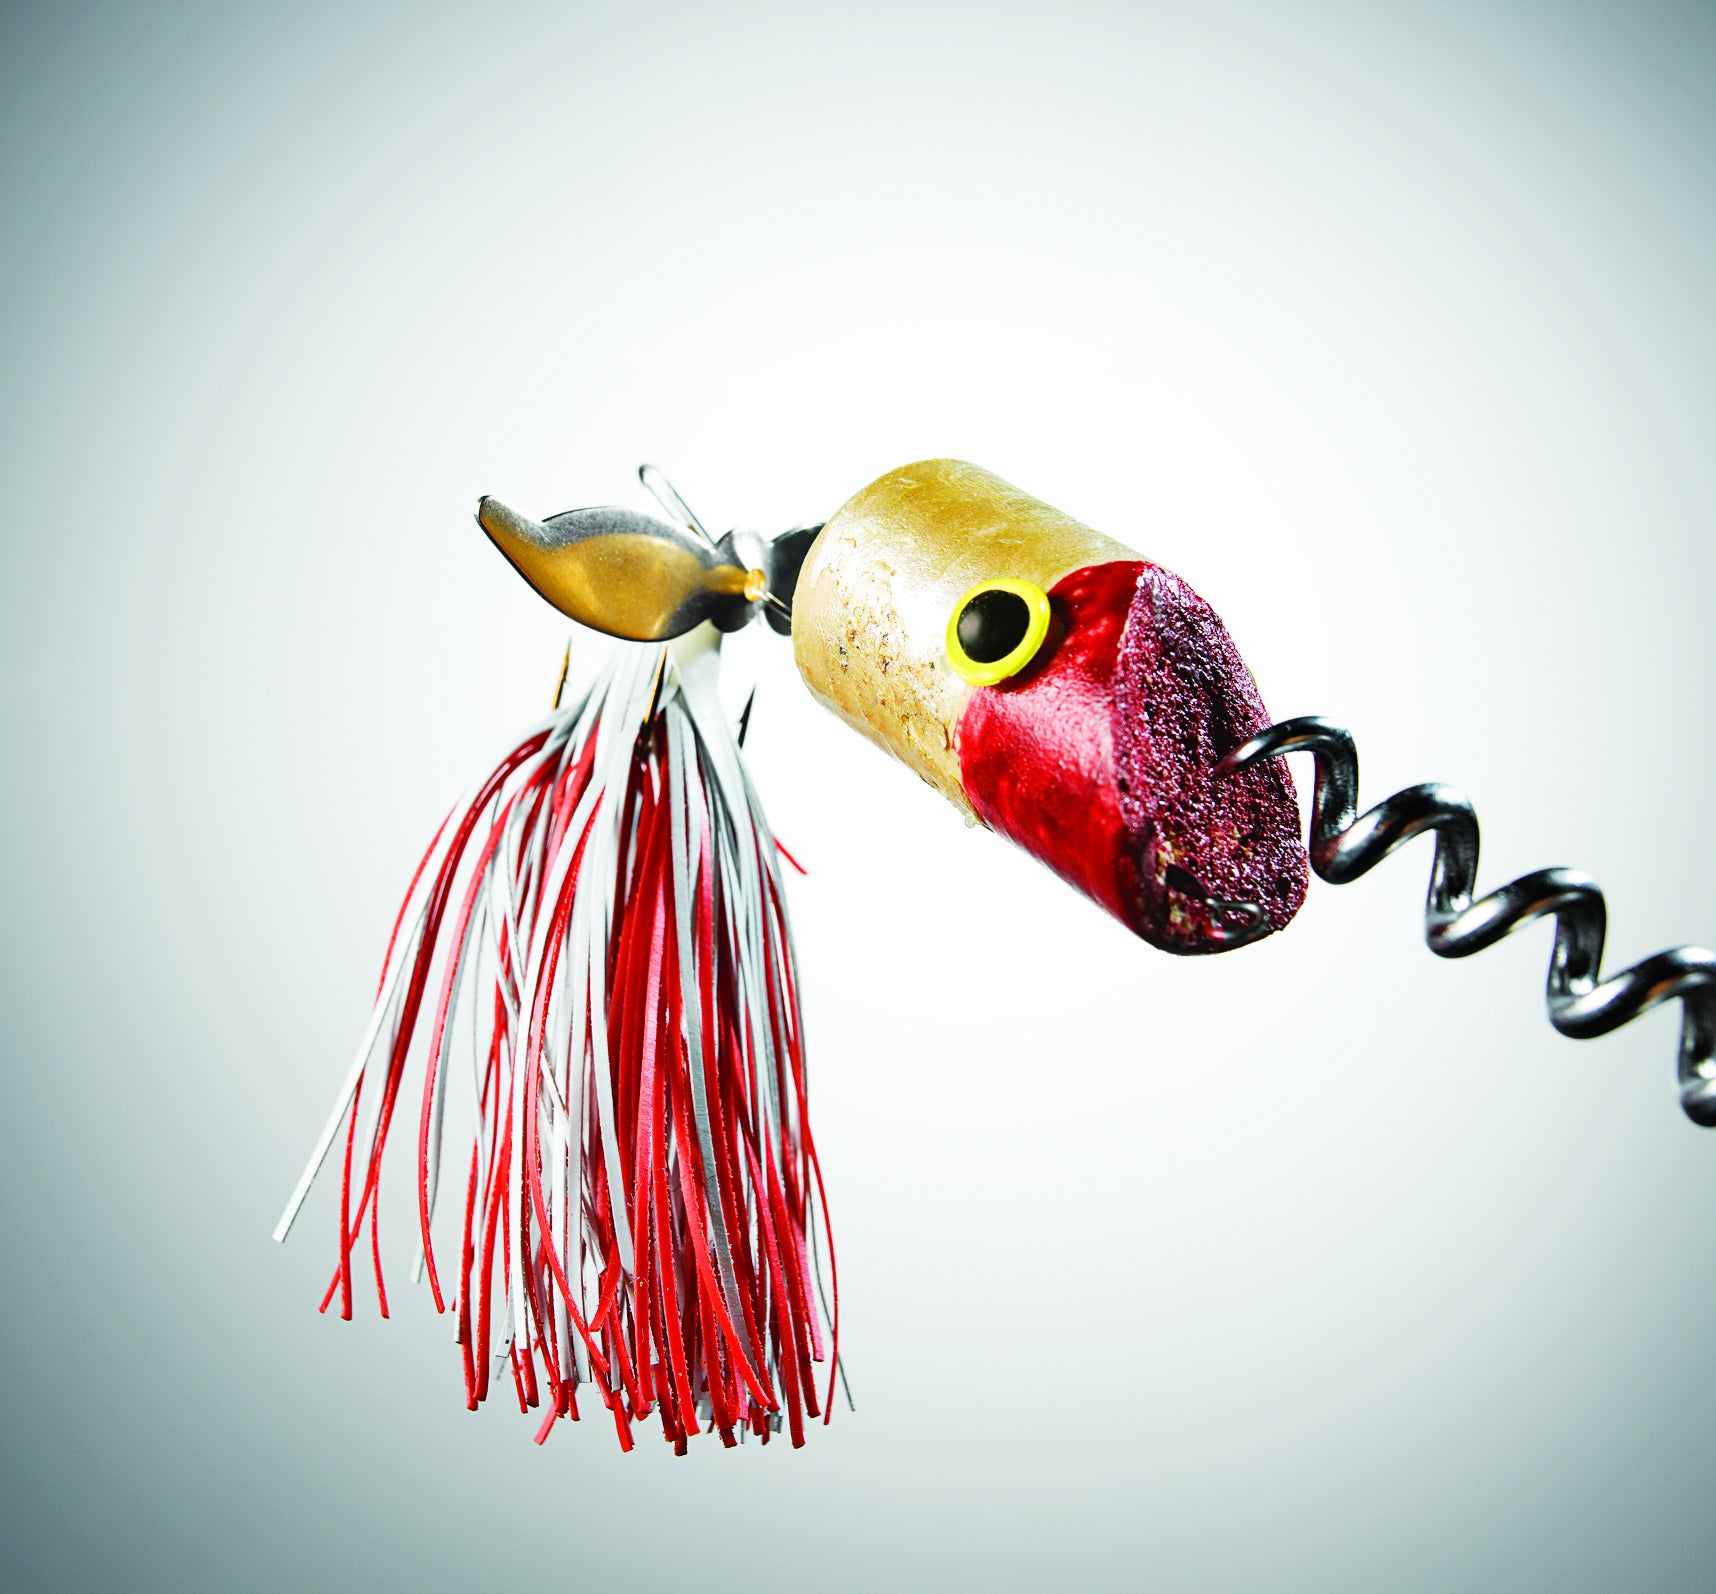 How to make fishing lures? Guide to Elevate Angling Success